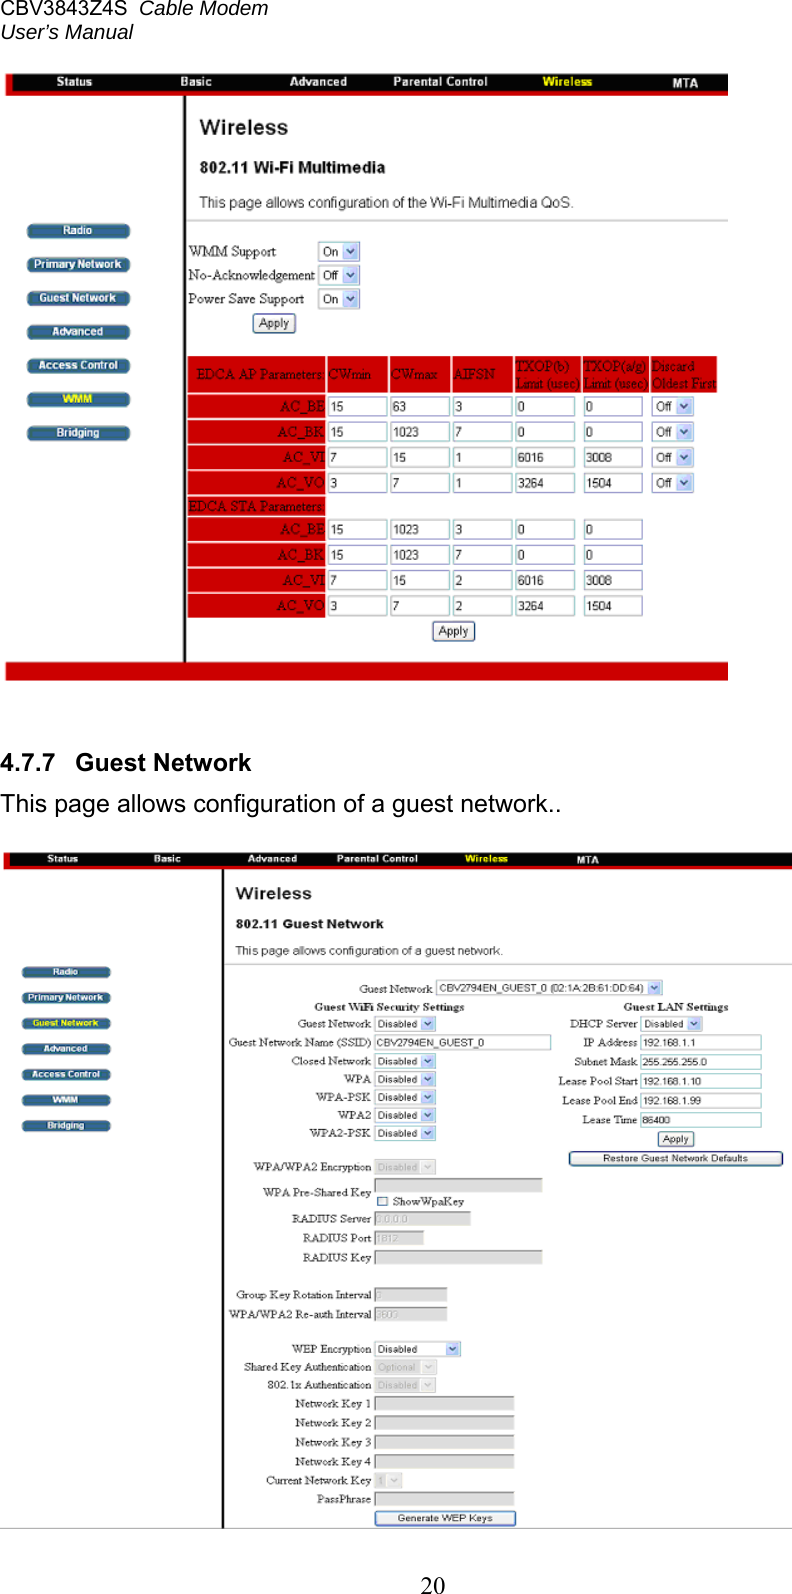 CBV3843Z4S  Cable Modem  User’s Manual   20    4.7.7  Guest Network This page allows configuration of a guest network..    